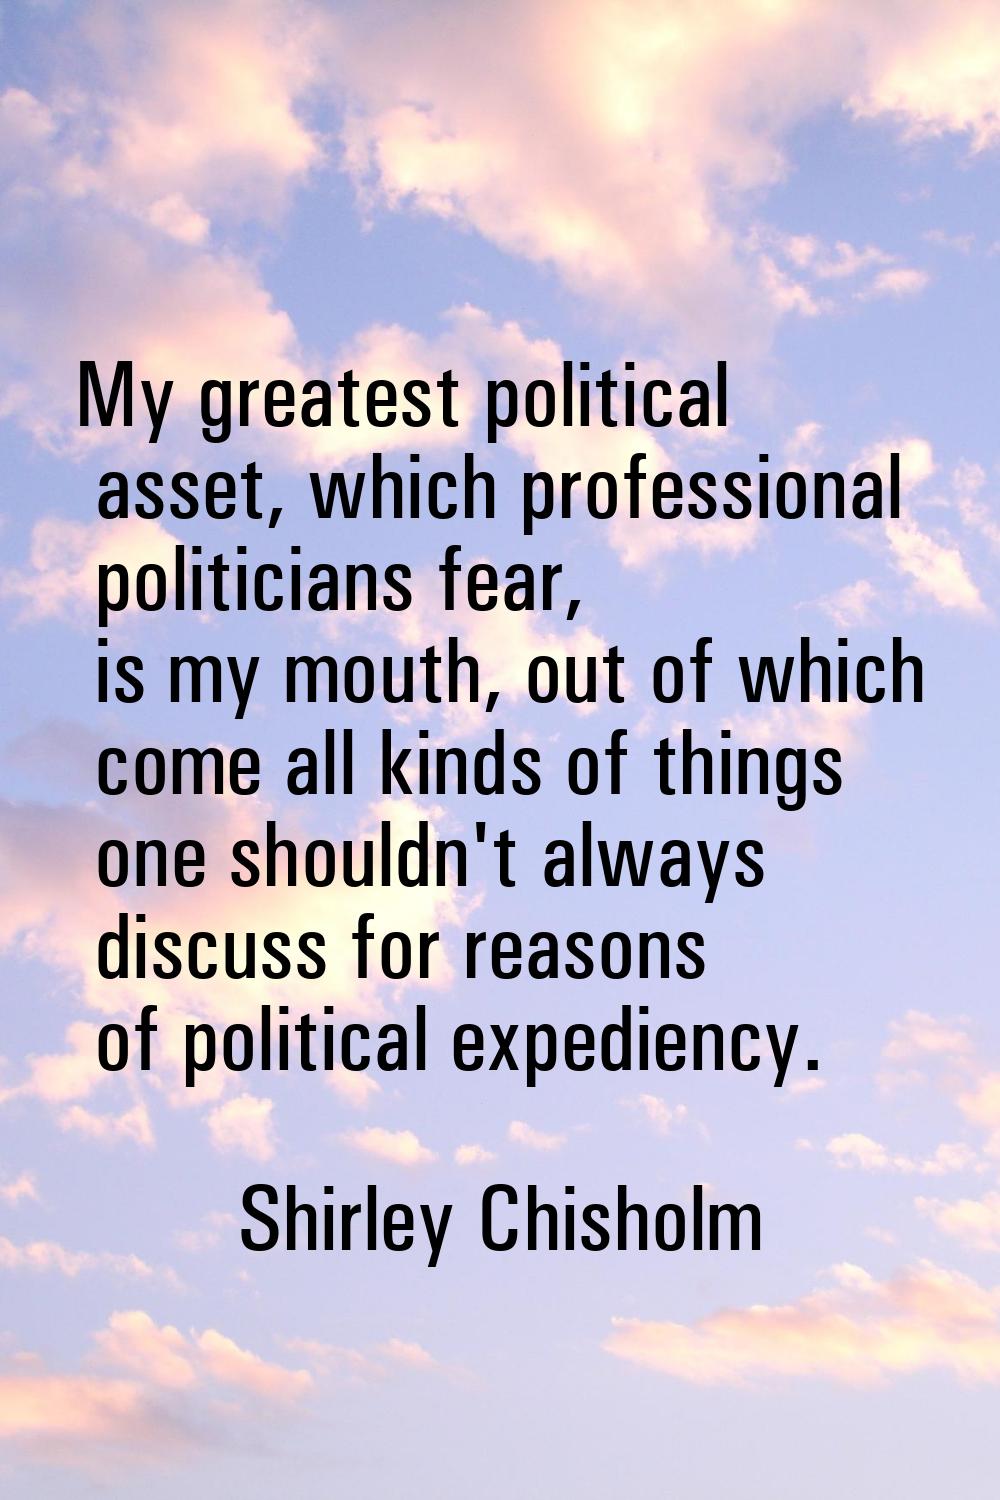 My greatest political asset, which professional politicians fear, is my mouth, out of which come al